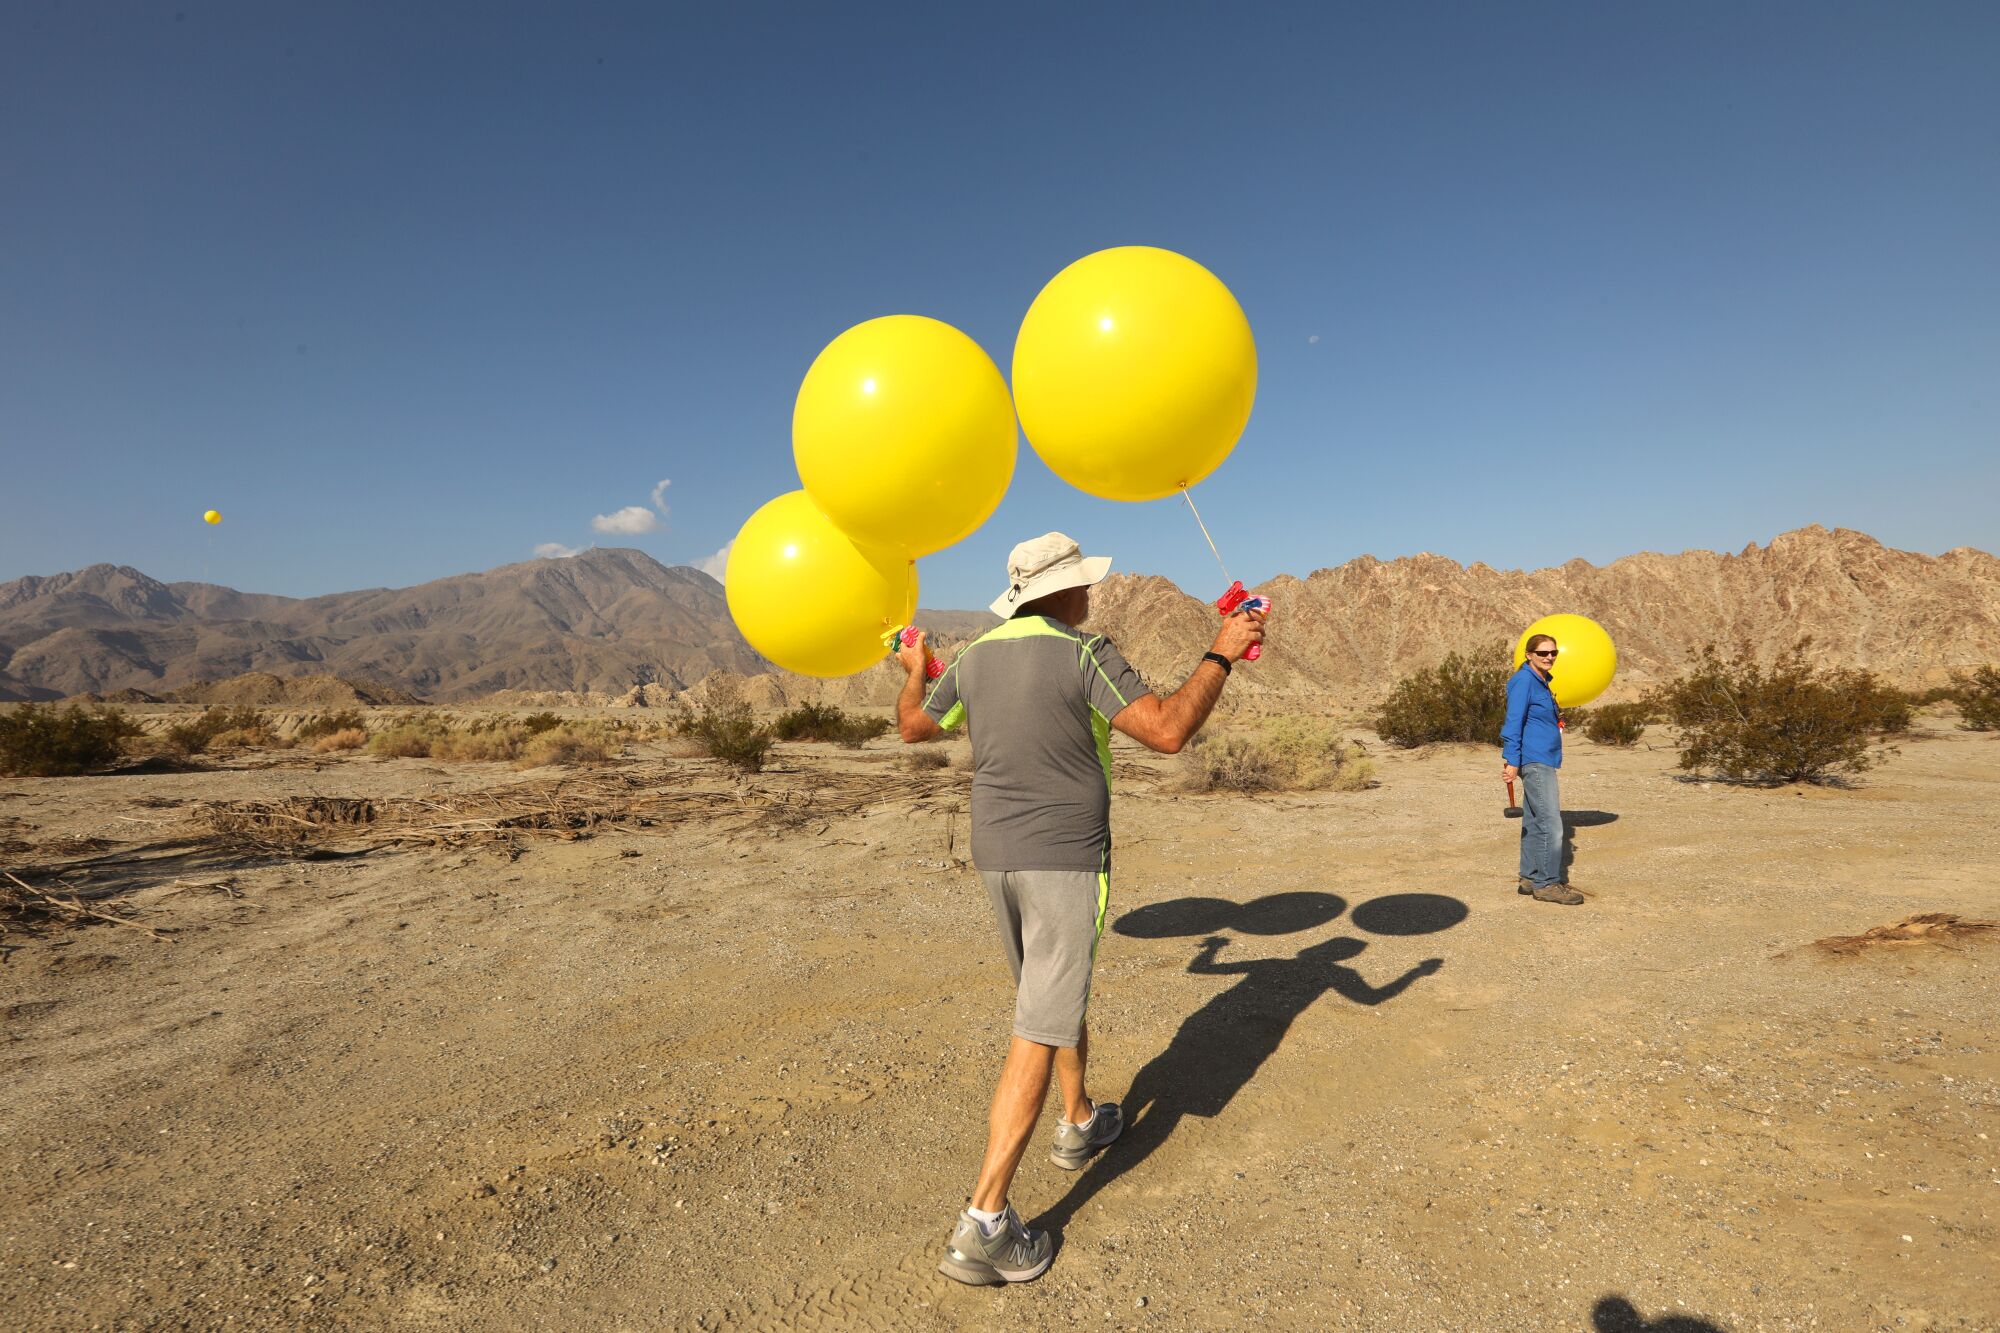 People put yellow balloons in the desert.